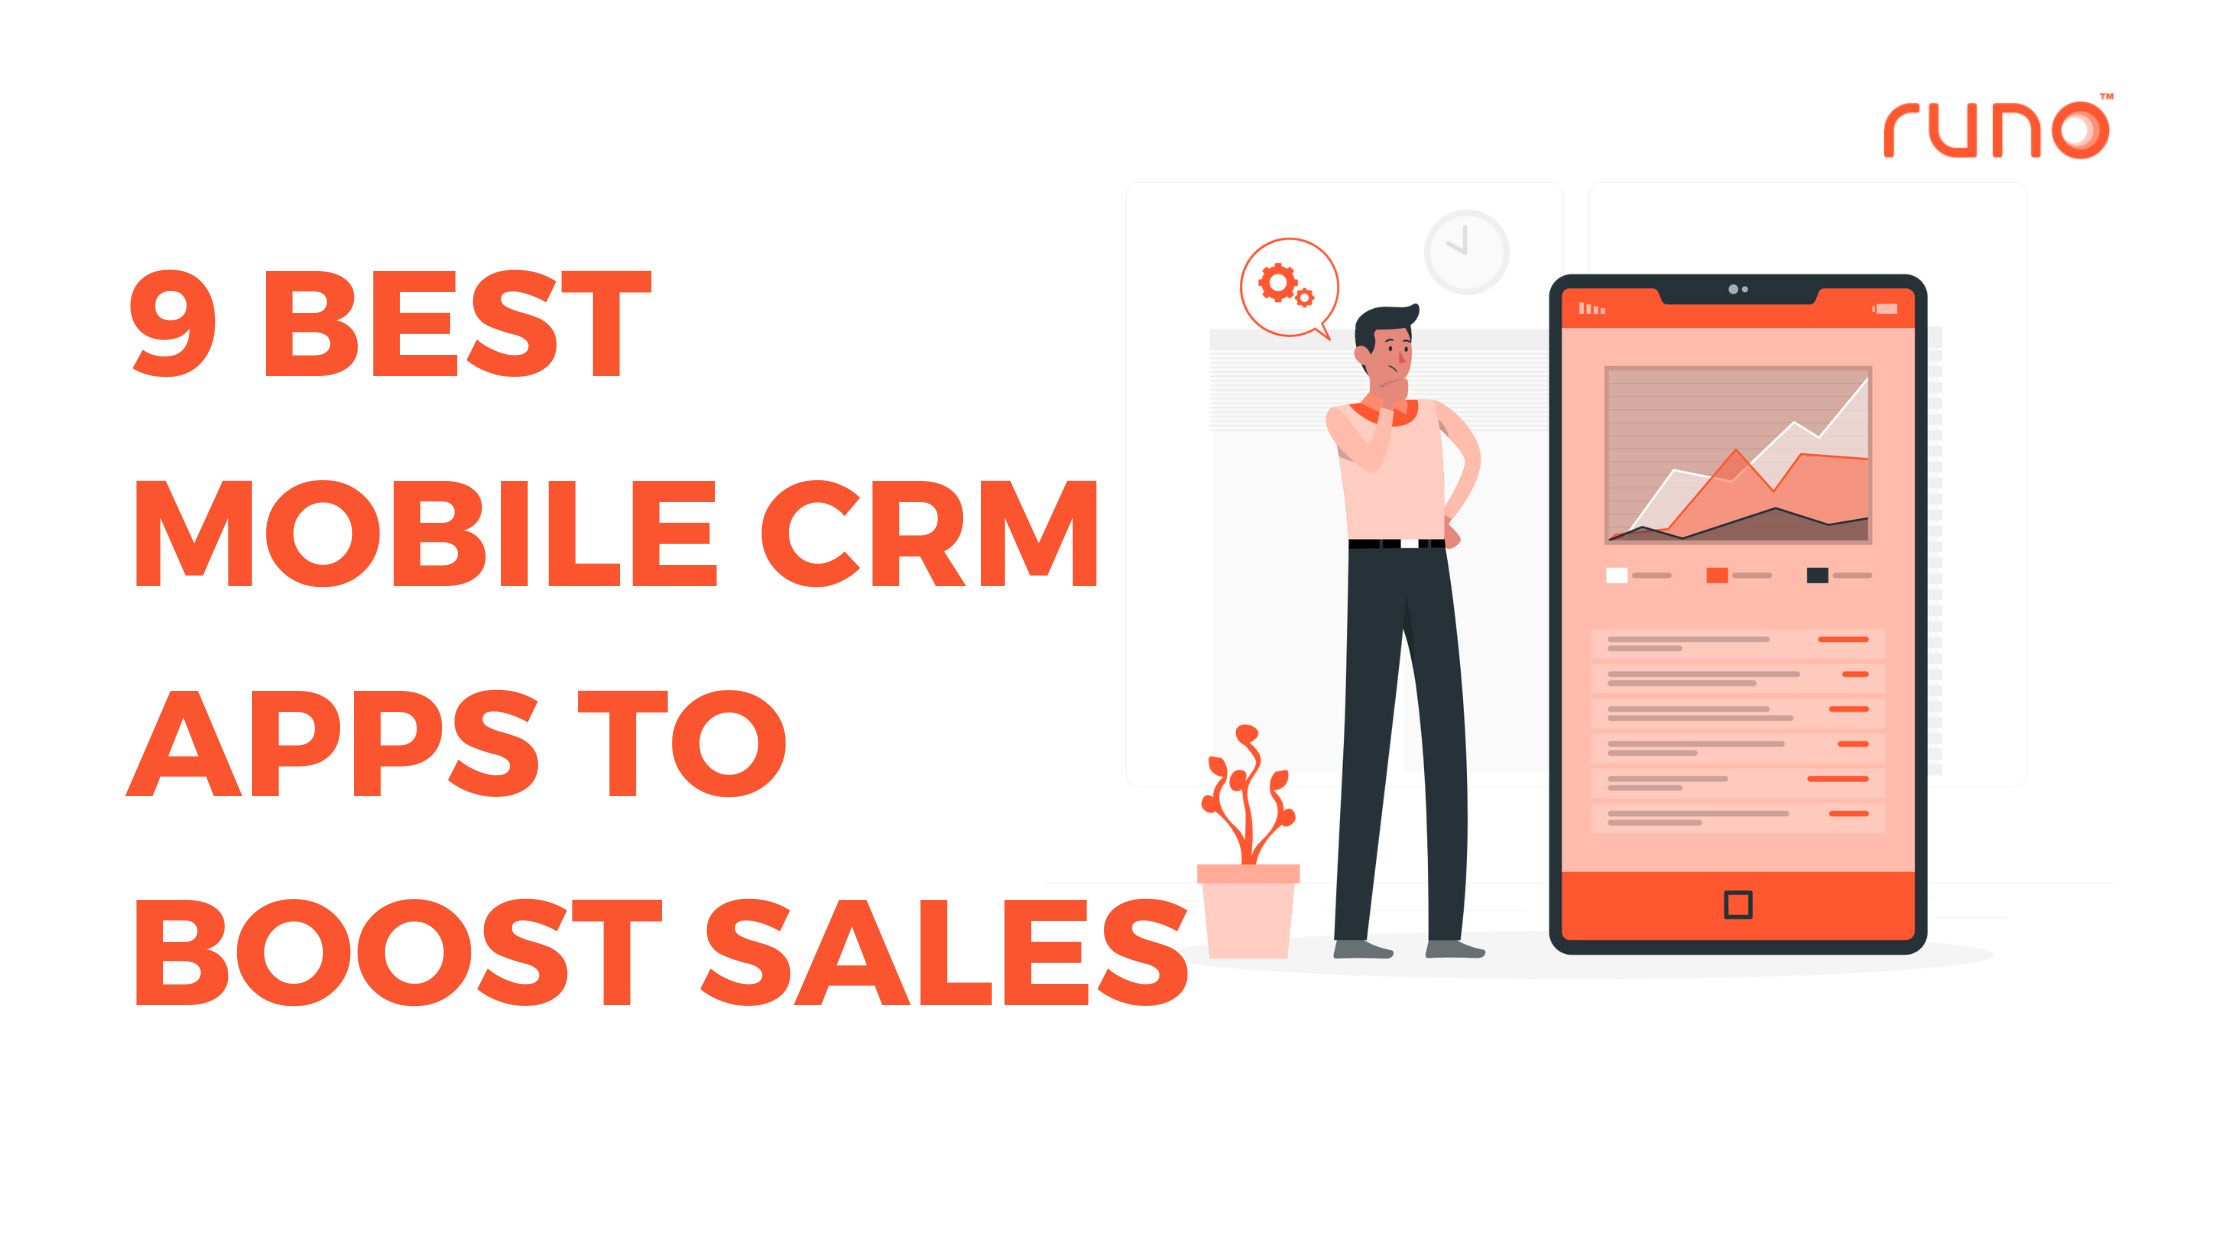 9 best Mobile CRM apps